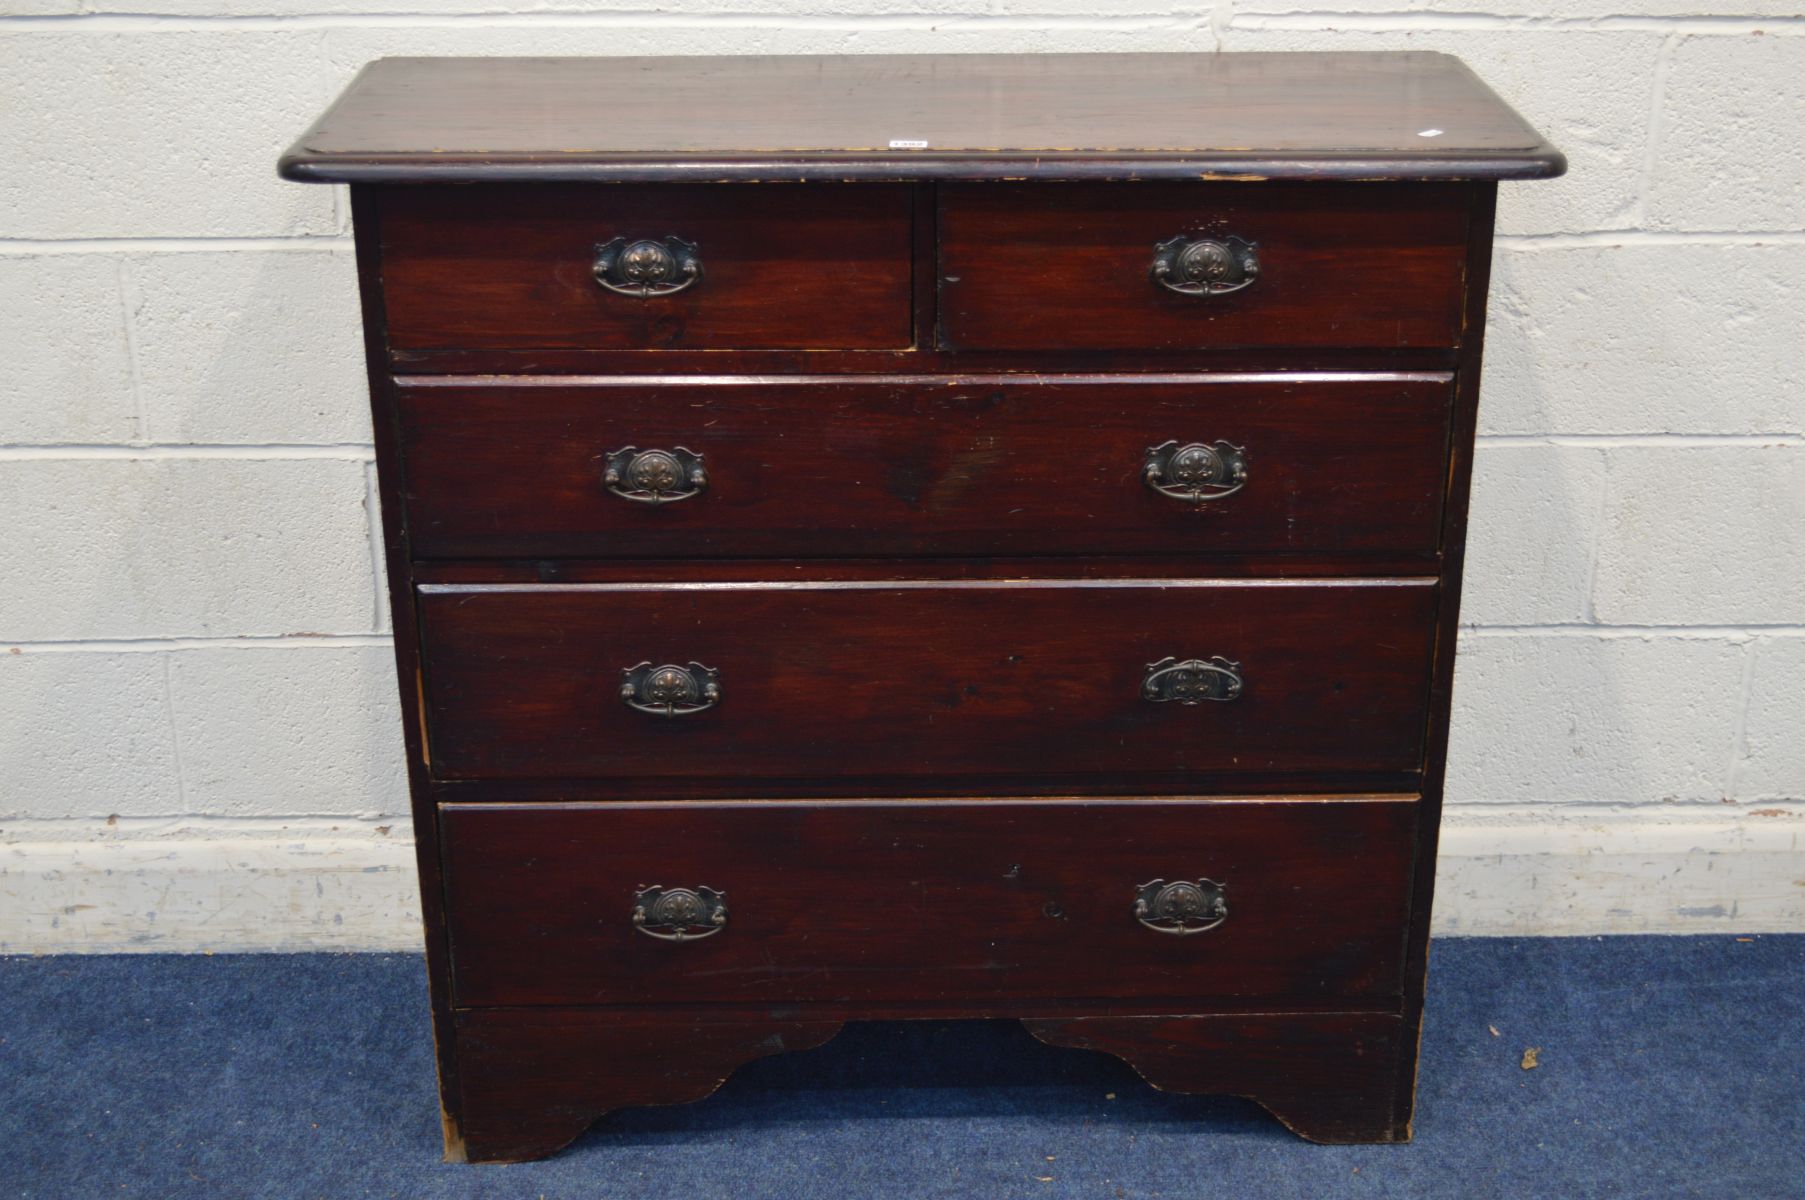 AN EDWARDIAN STAINED PINE CHEST OF TWO OVER THREE LONG DRAWERS, width 110cm x depth 43cm x height